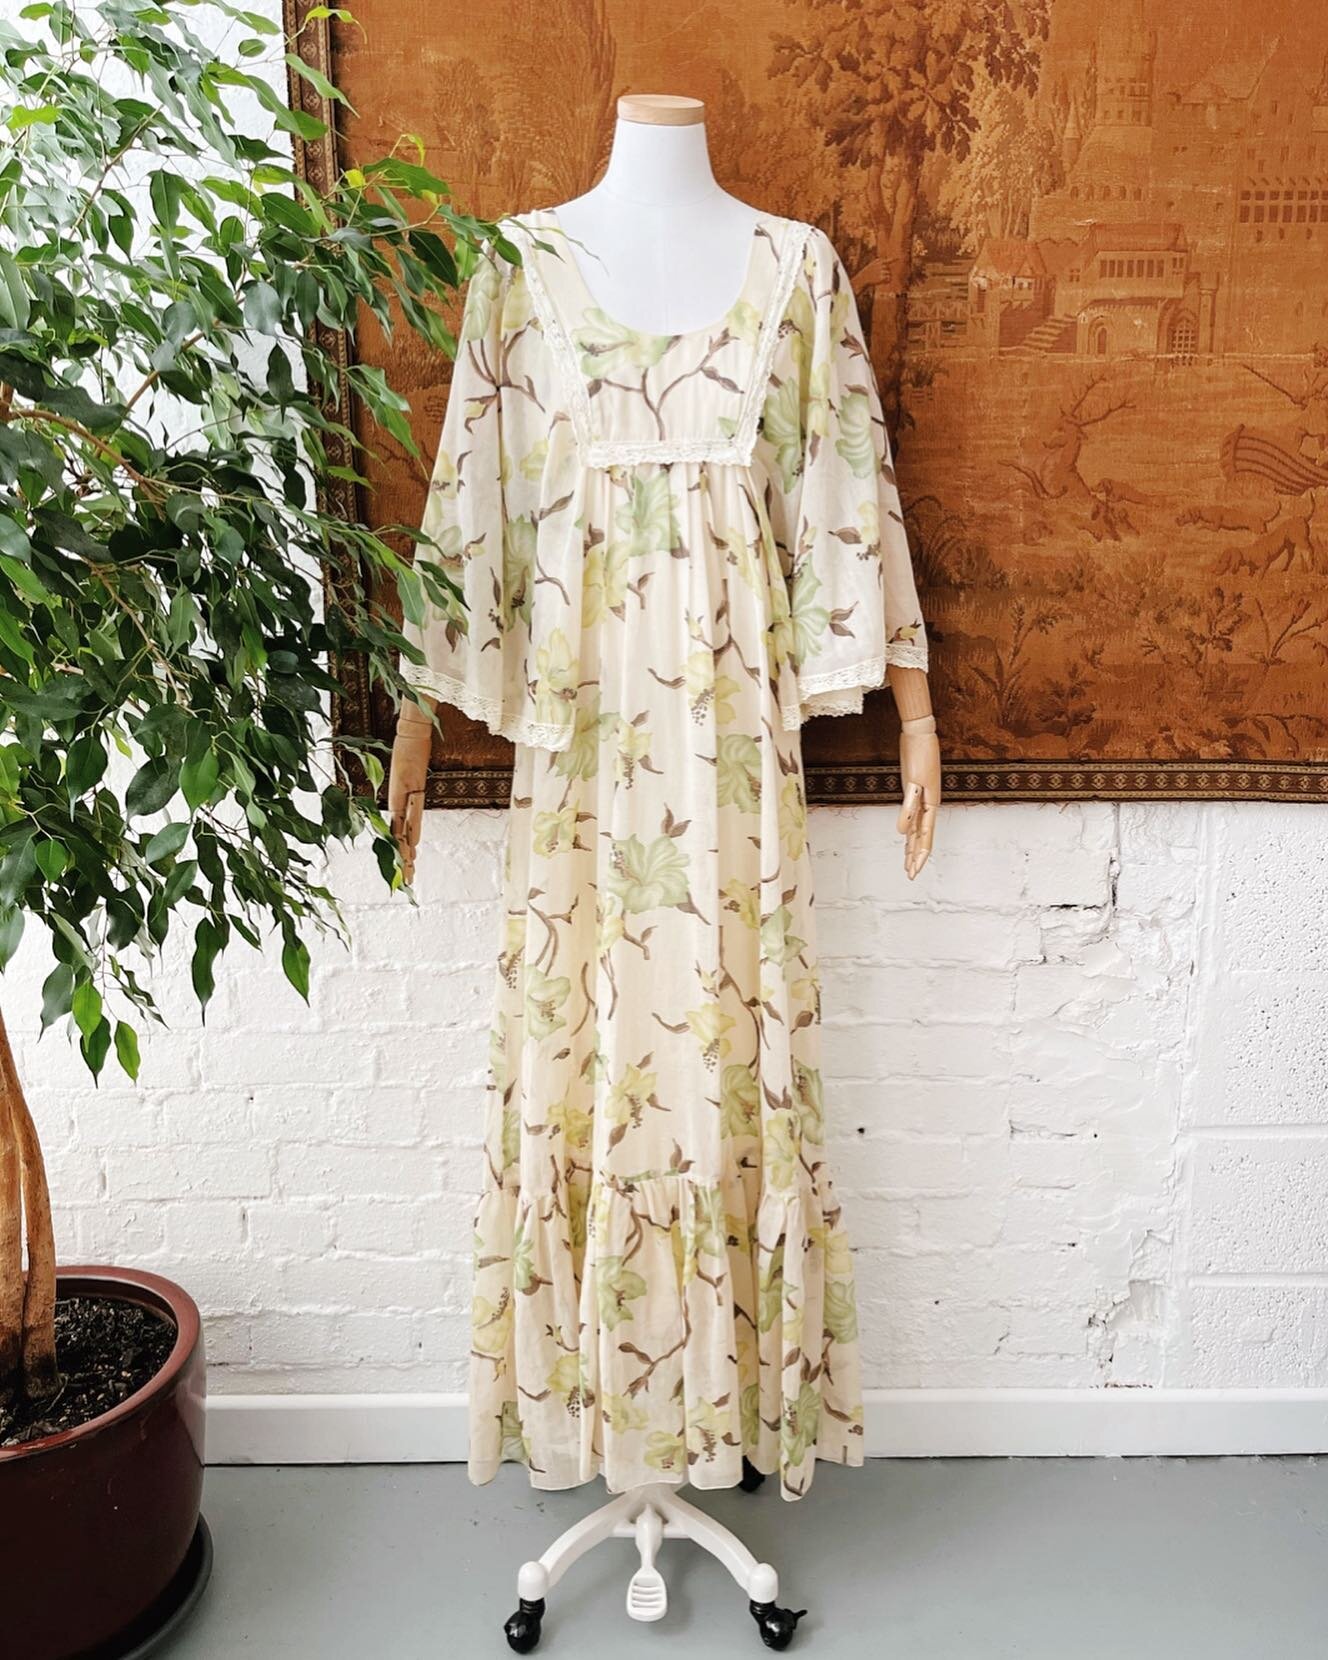 Stunning 1970s John Charles angel sleeve maxi dress coming soon to the website or available to purchase now via dm 🌿
.
.
#cordialvintage #johncharles #vintagejohncharles #vintagedress #vintageforsale #angelsleeve #sleeveporn #vintagemaxidress #vinta